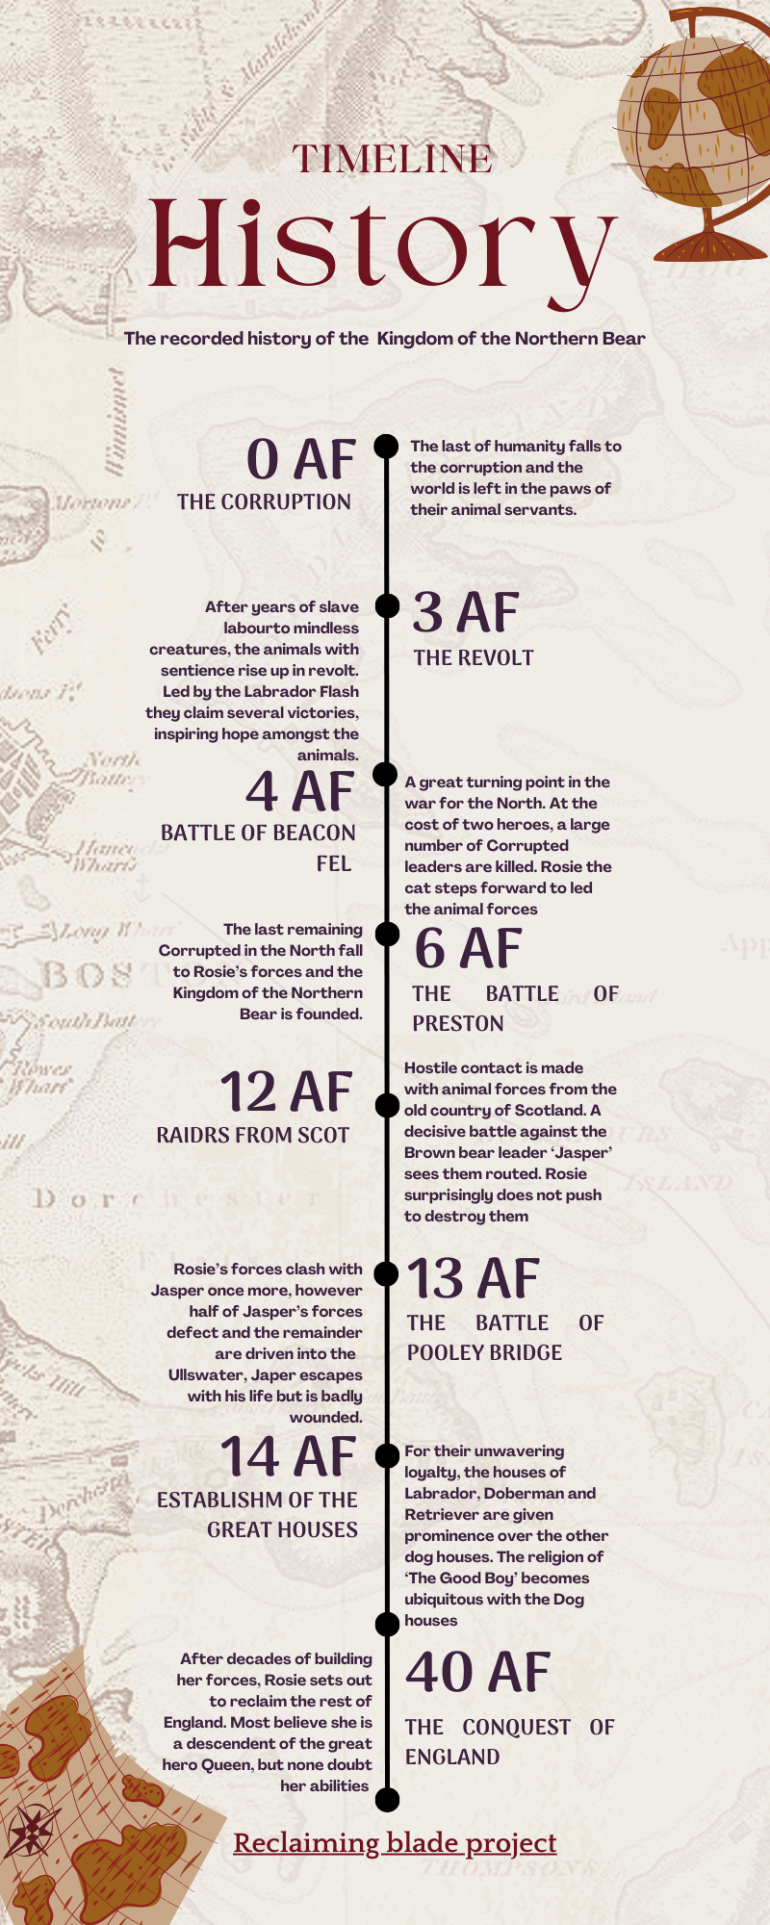 The timeline of The Kingdom of the Northern Bear